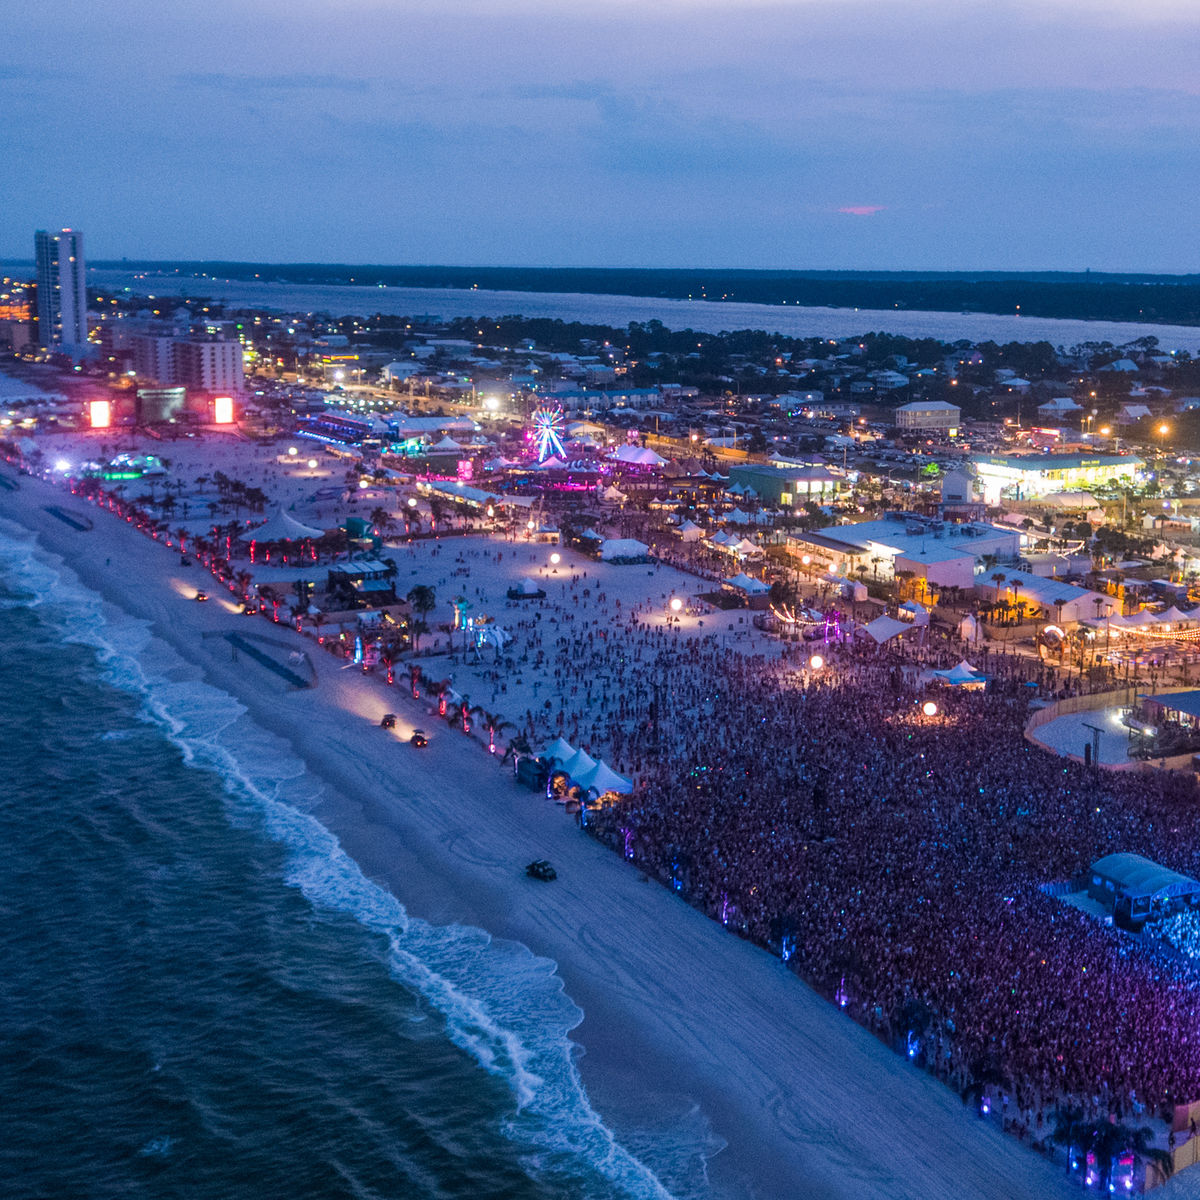 Aerial image of Hangout Music Festival crowd and stage on the beach 